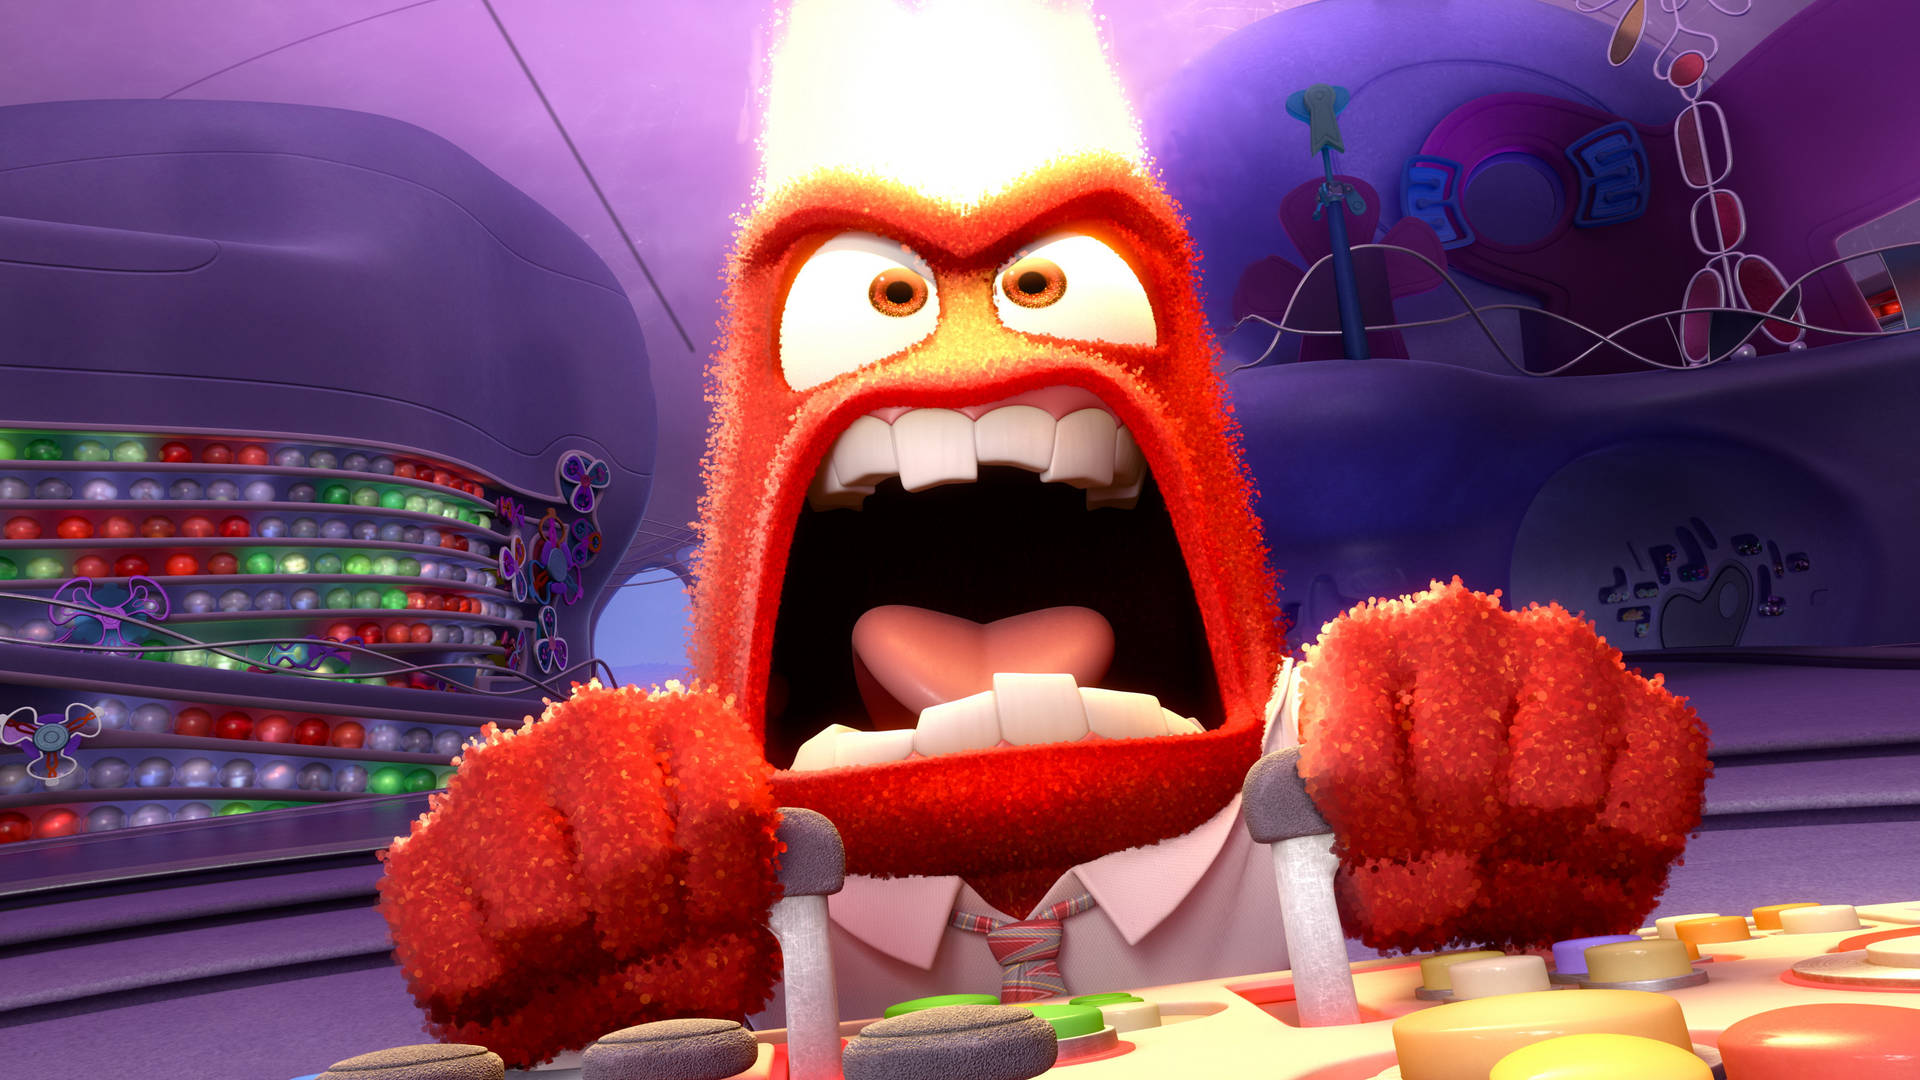 Inside Out's Anger Struggles With Sadness Background